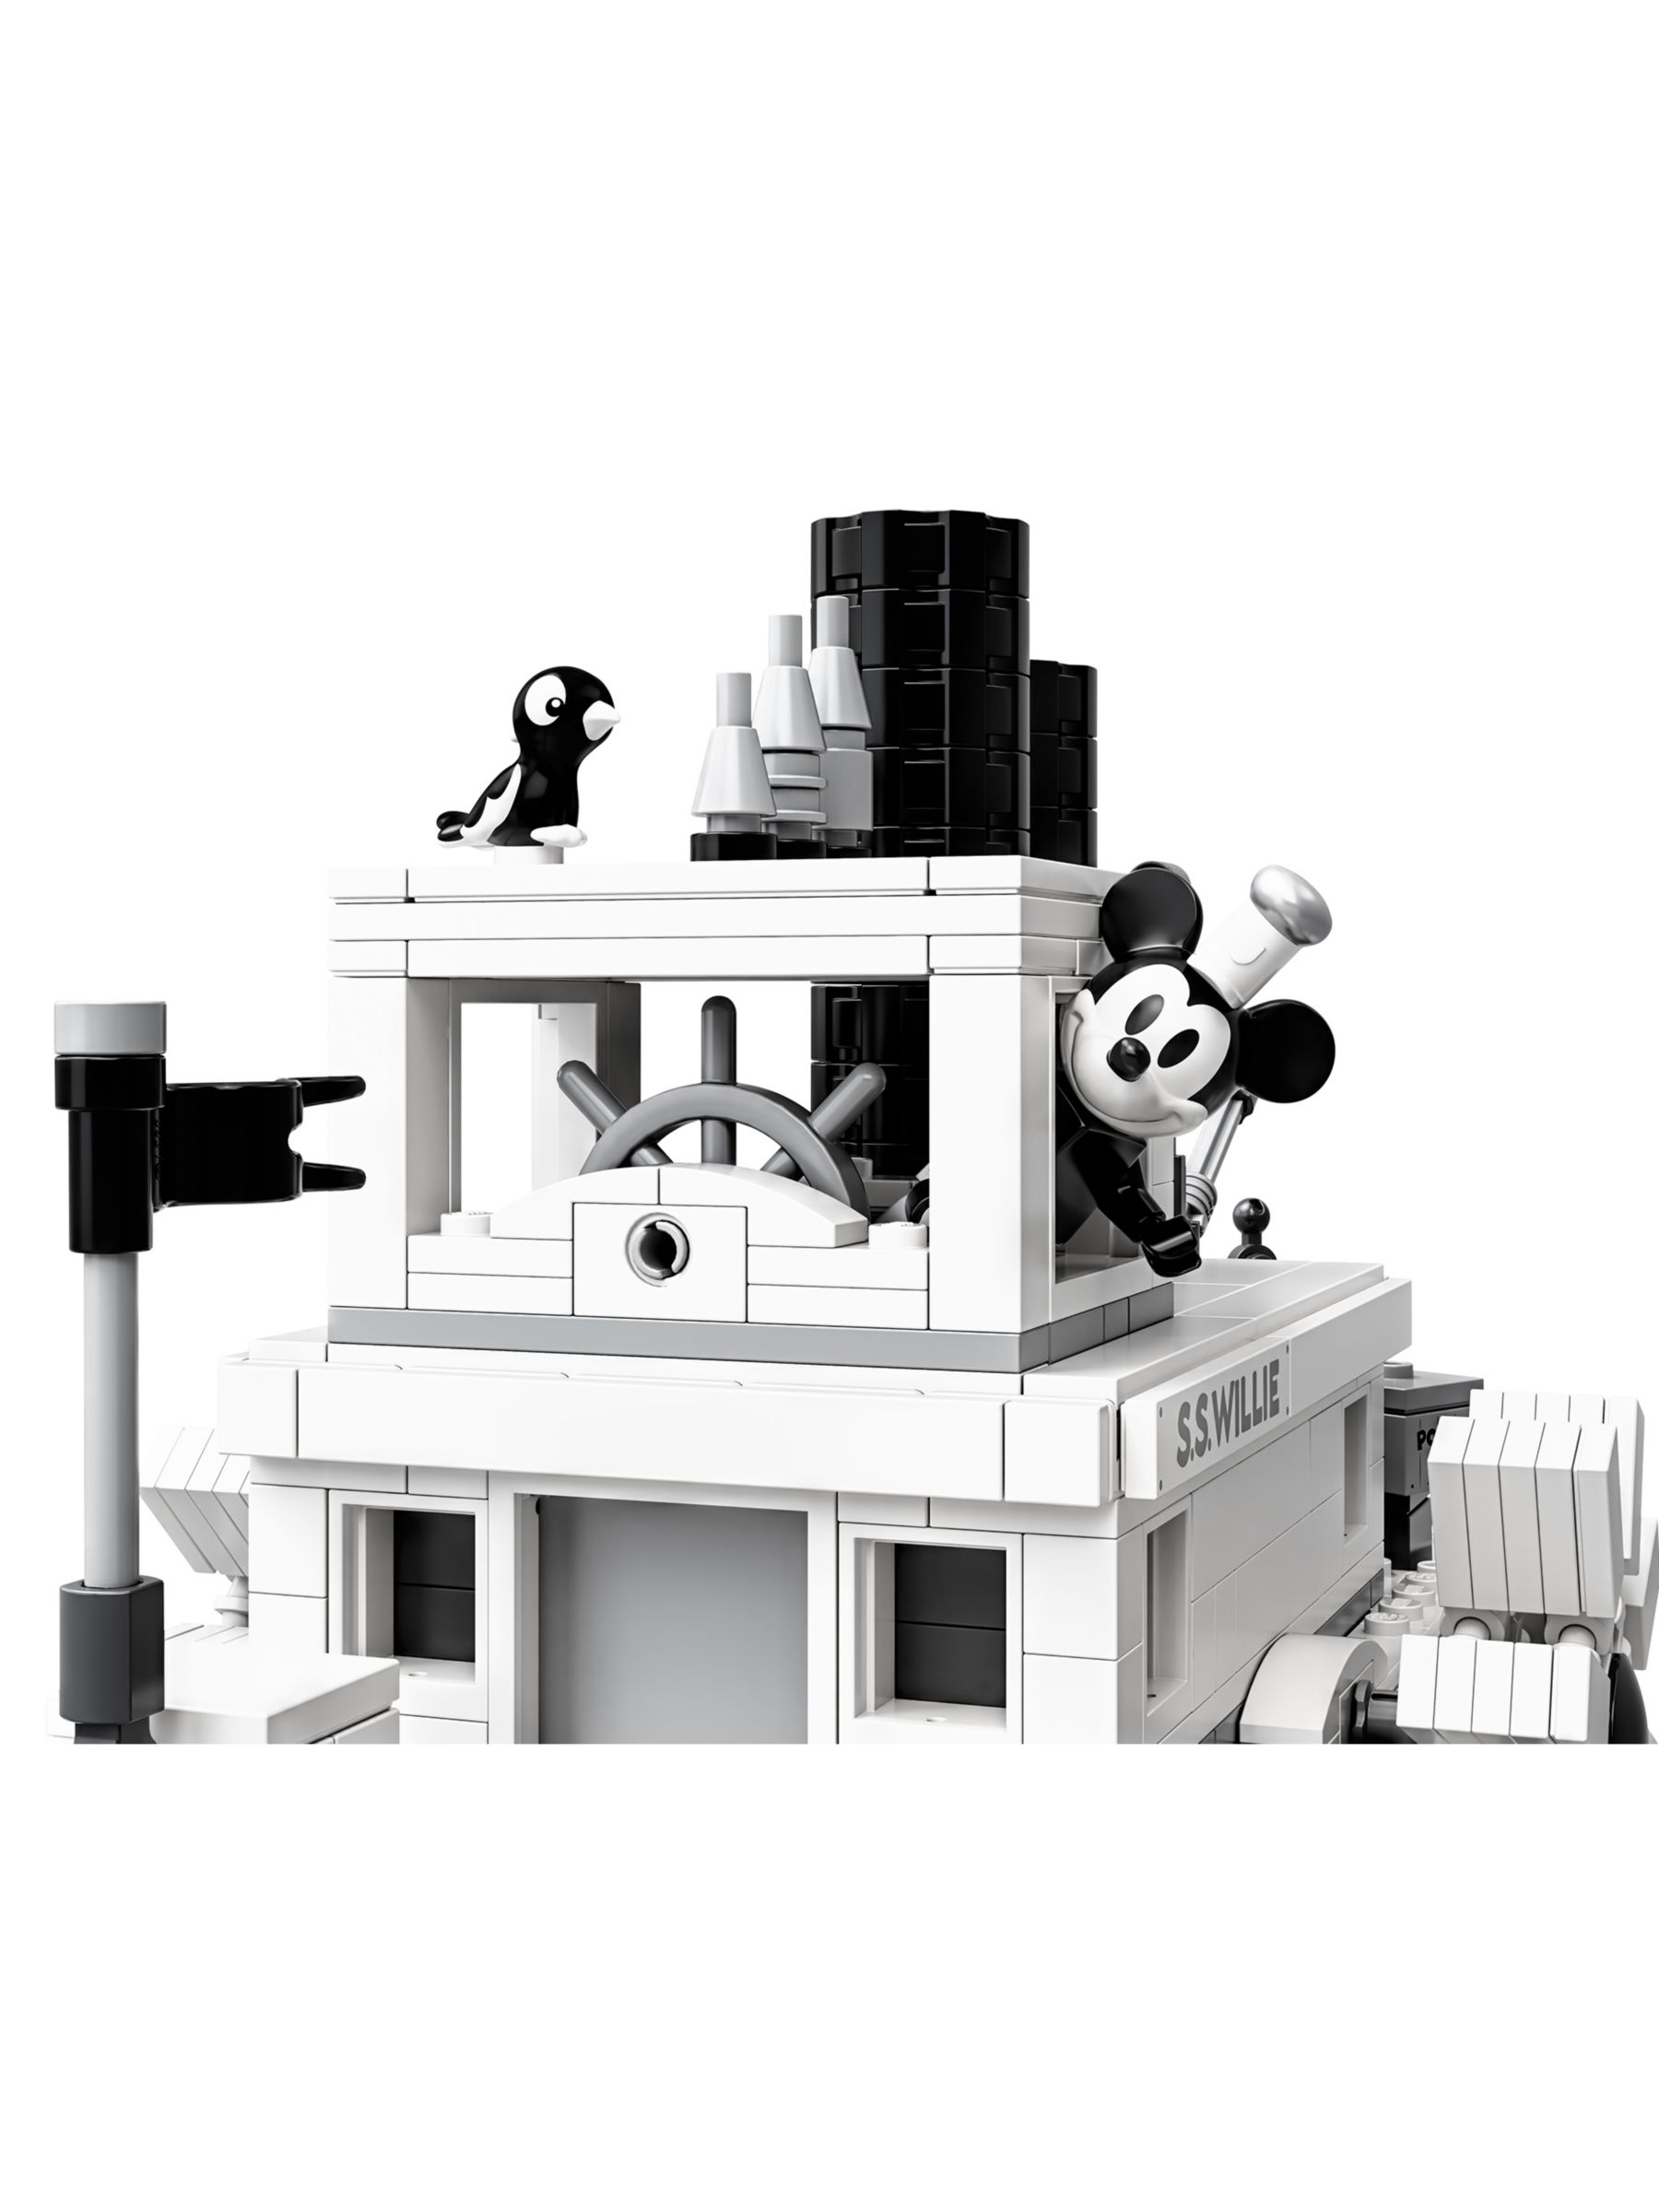 Lego Ideas 21317 Disney Mickey Mouse Steamboat Willie Vintage